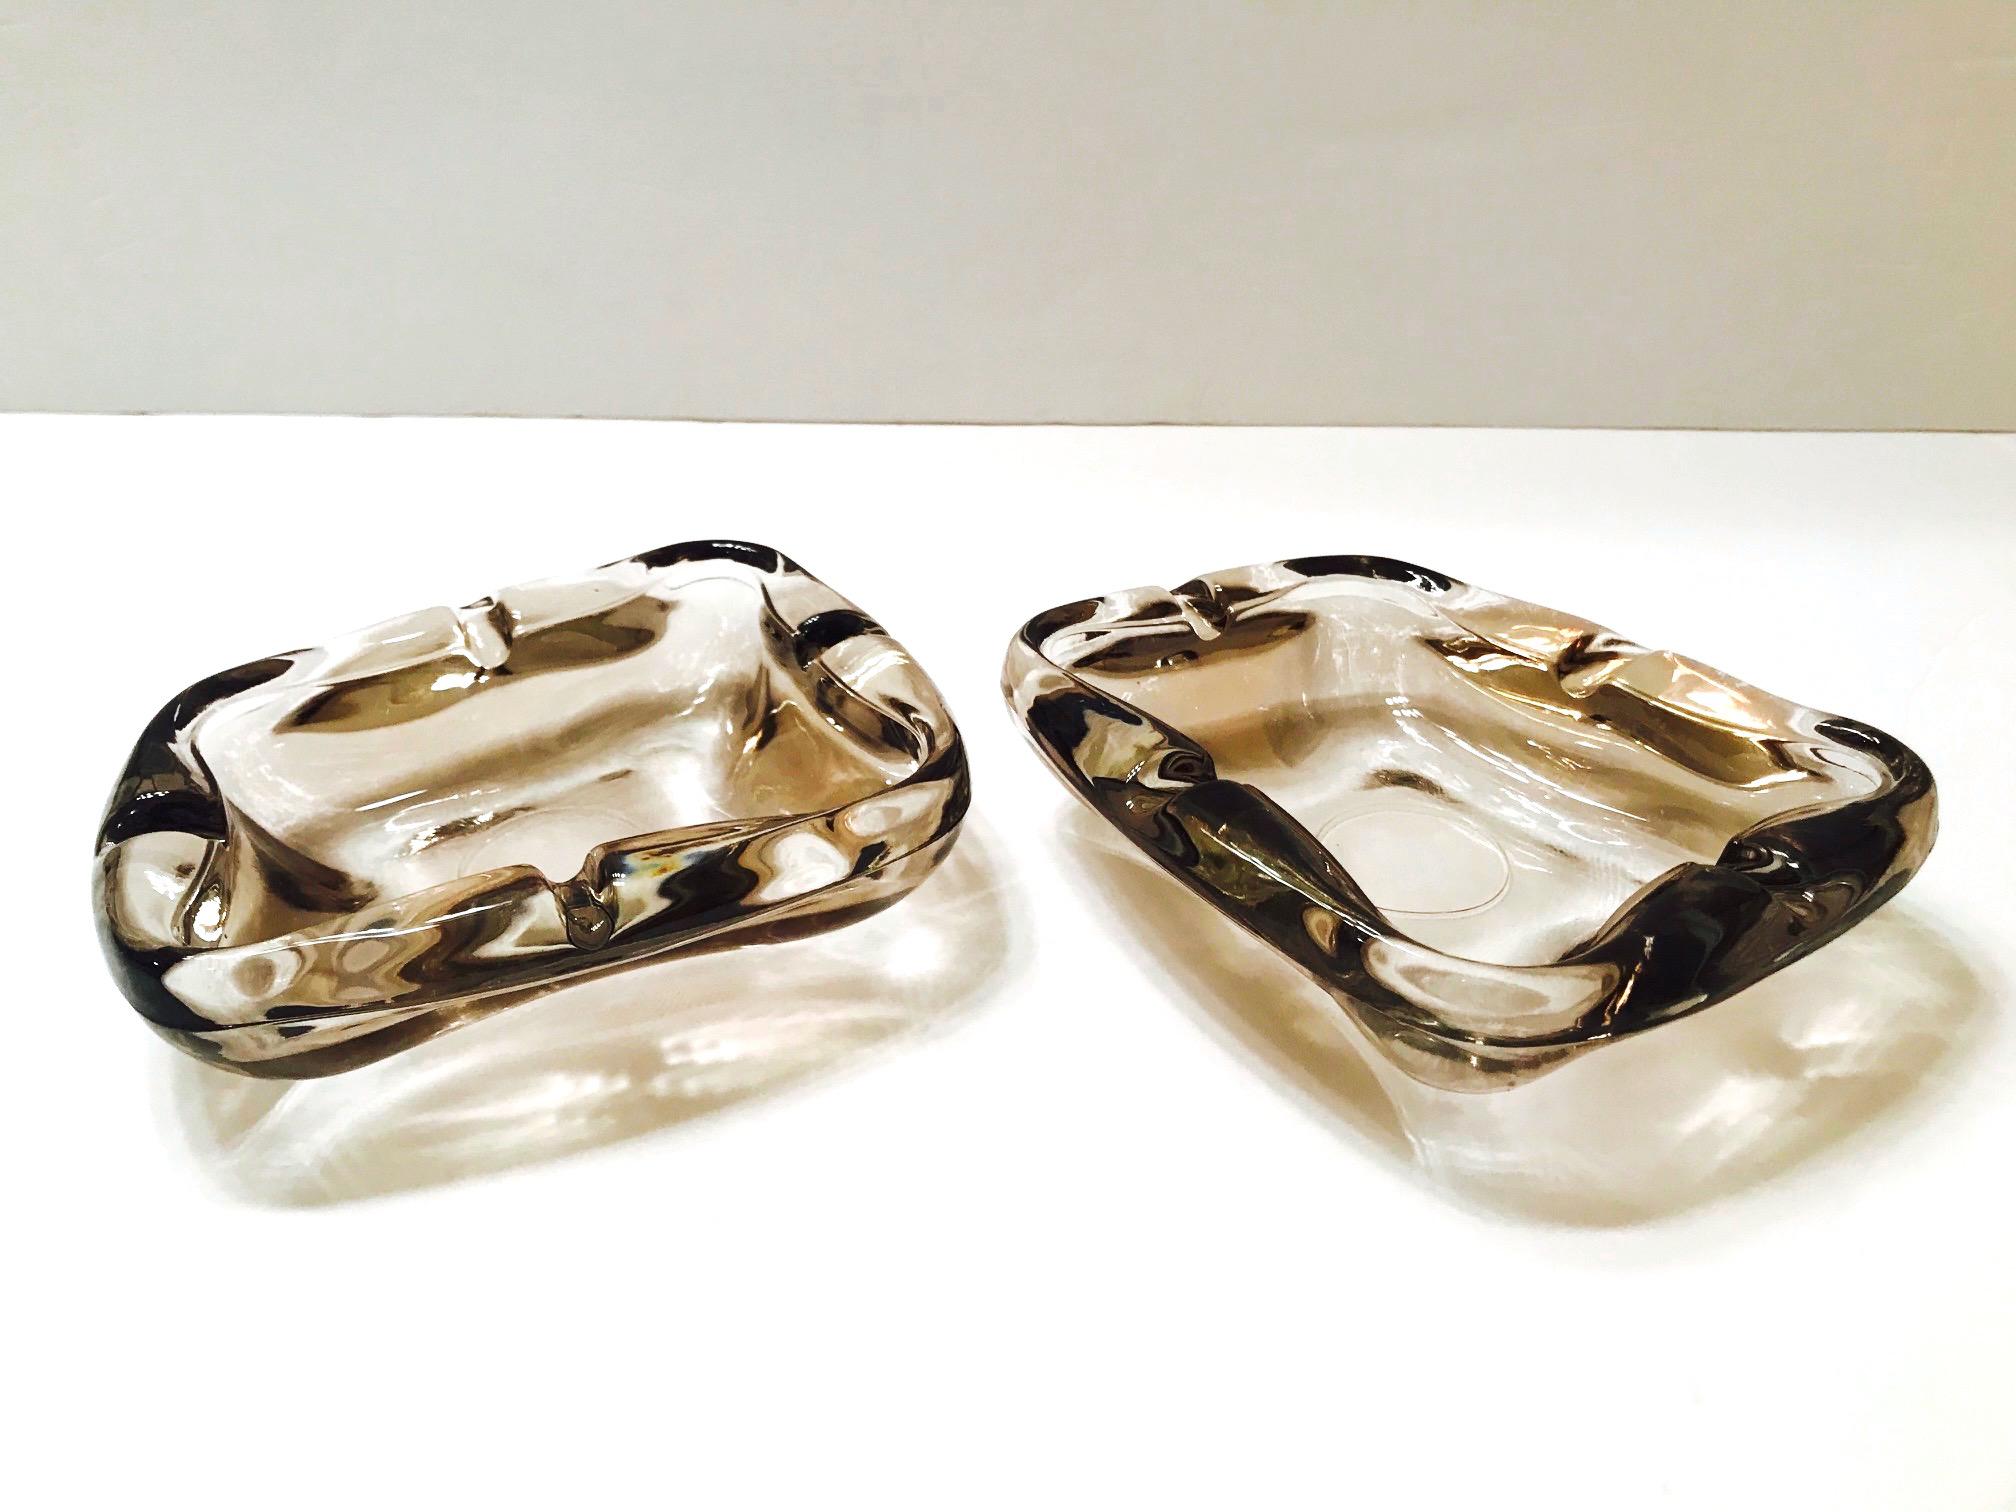 Hand-Crafted Pair of French Mid-Century Modern Smoked Glass Ashtrays, 1960s